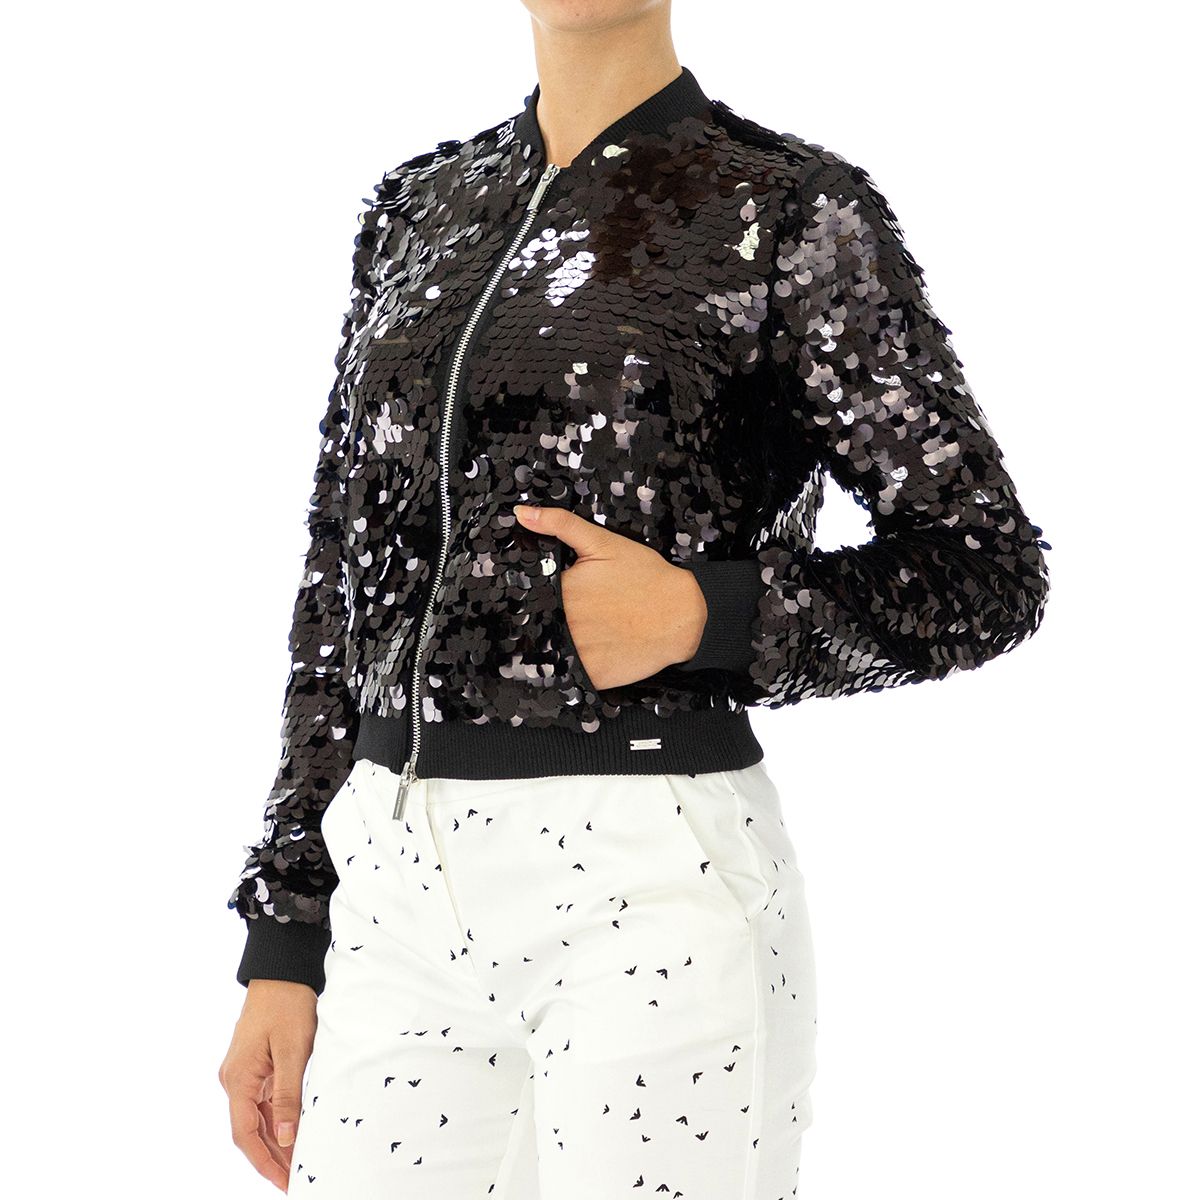 Armani Exchange 6ZYG37YNGJZ-1200-10 Fall in love with this sequined jacket, which will brighten up your nights.